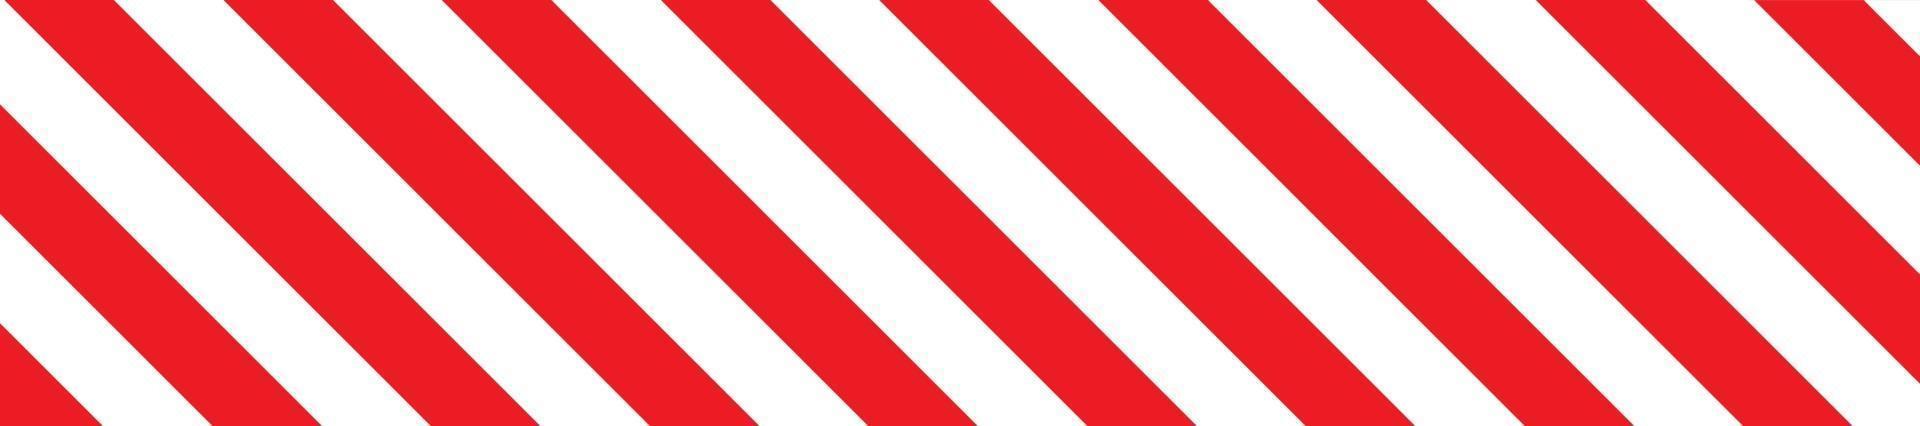 Red stripes on white background. Striped diagonal pattern vector